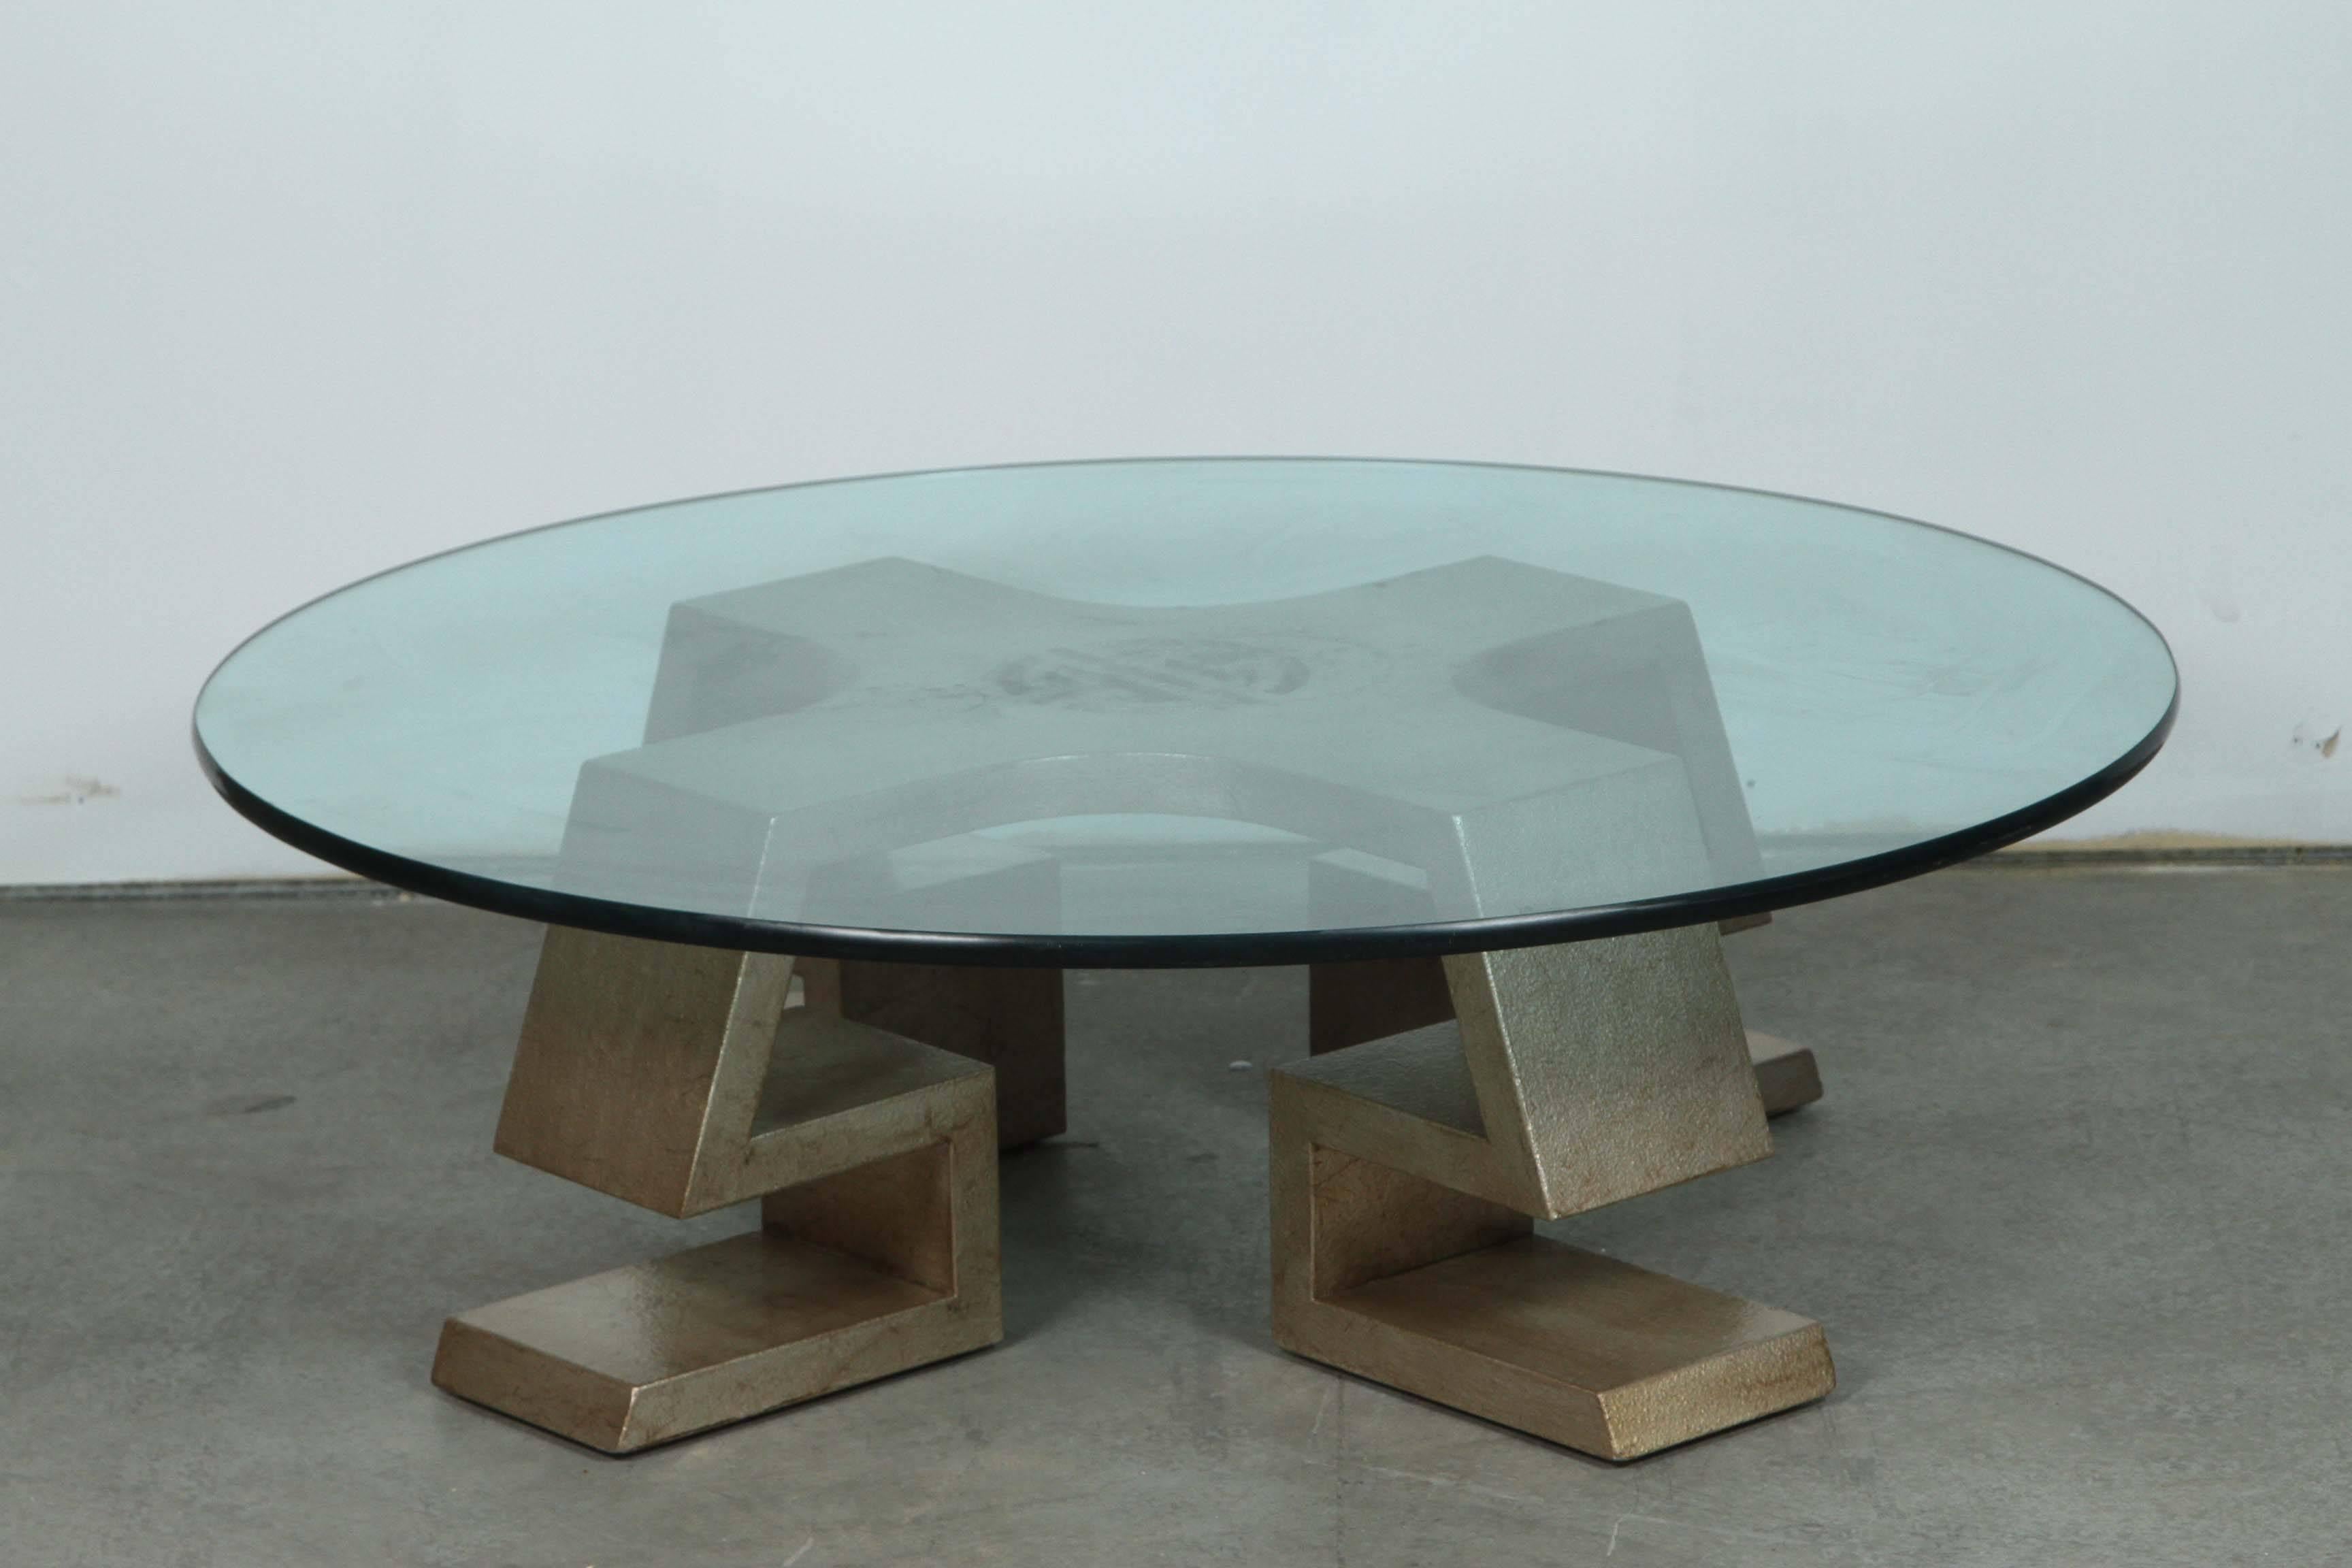 Exquisite and rare coffee table by James Mont.
The table base has a central oriental medallion and has been newly refinished in a glazed silver leaf finish.
The table base supports a 3/4